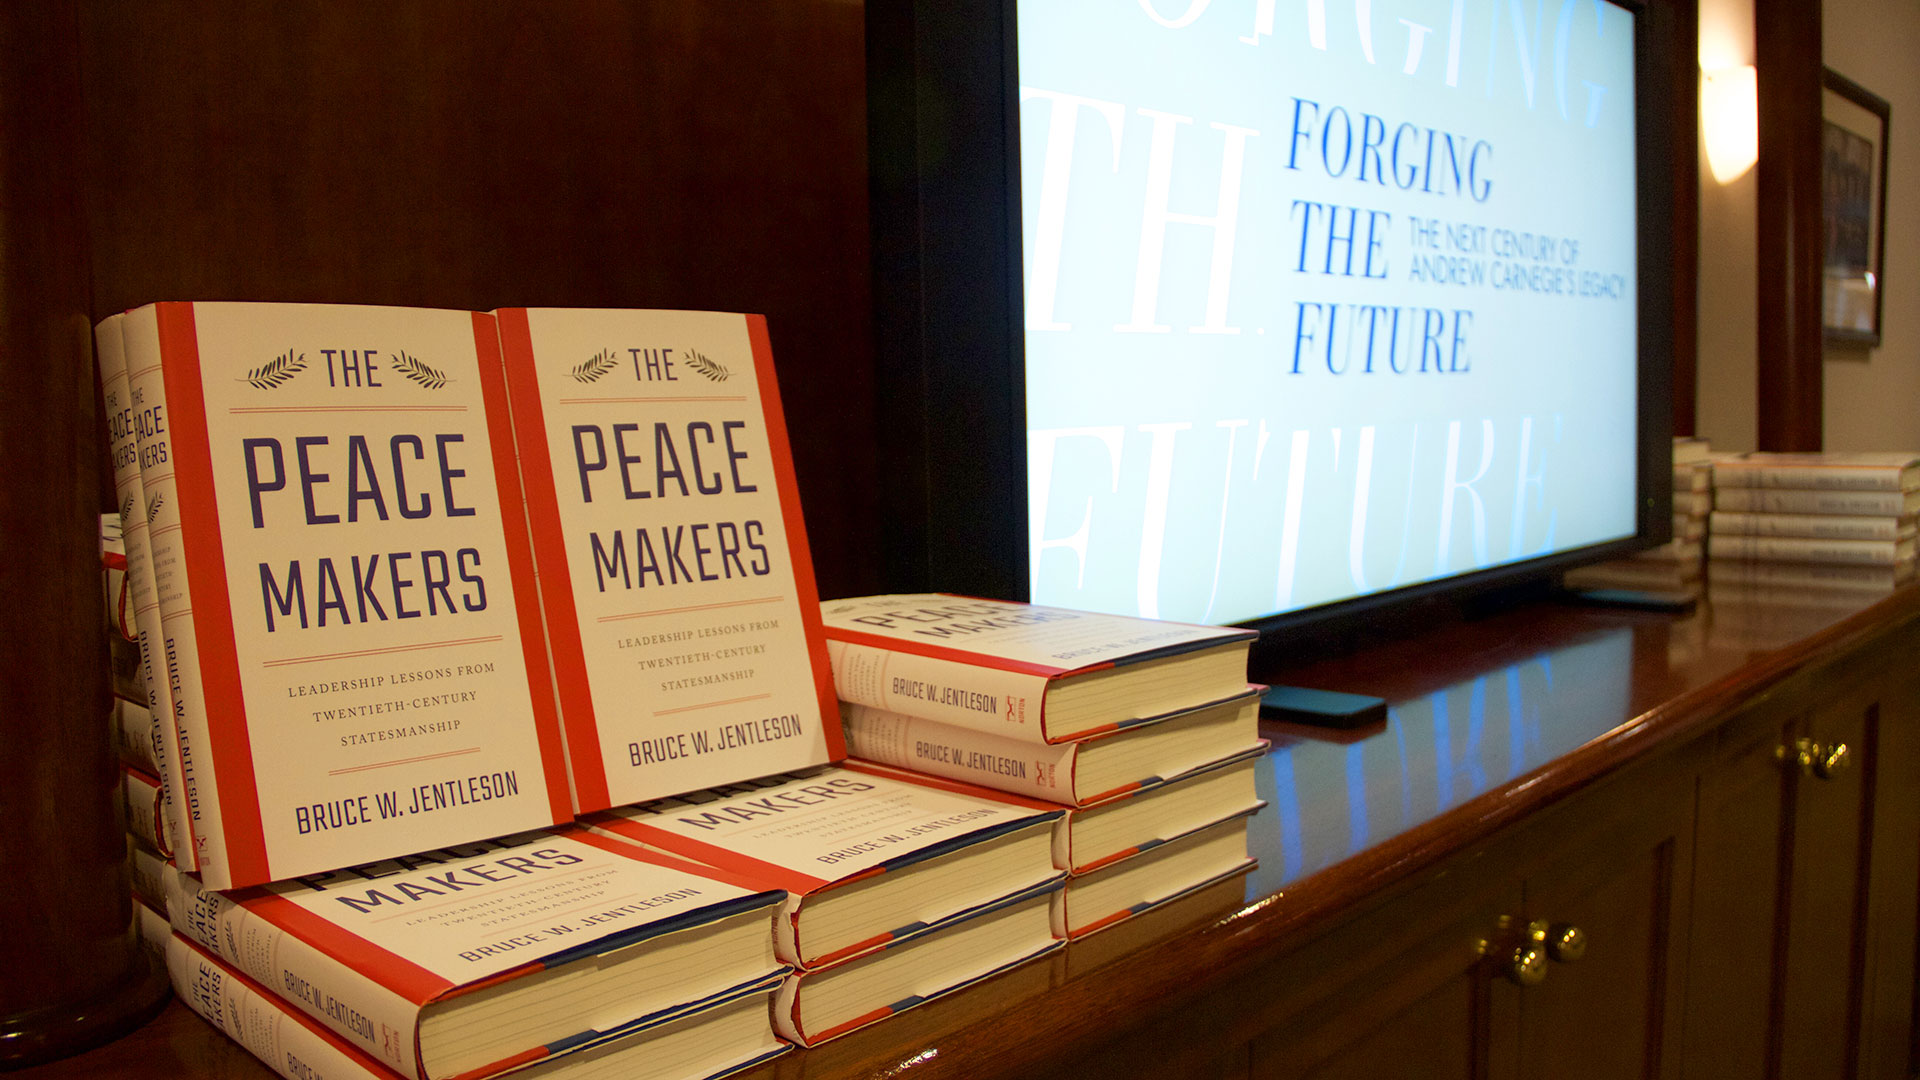 The family of Carnegie institutions opened the Forging the Future series with an event that draws upon the lessons of the past century as we look — it is hoped — to forge a more peaceful future.